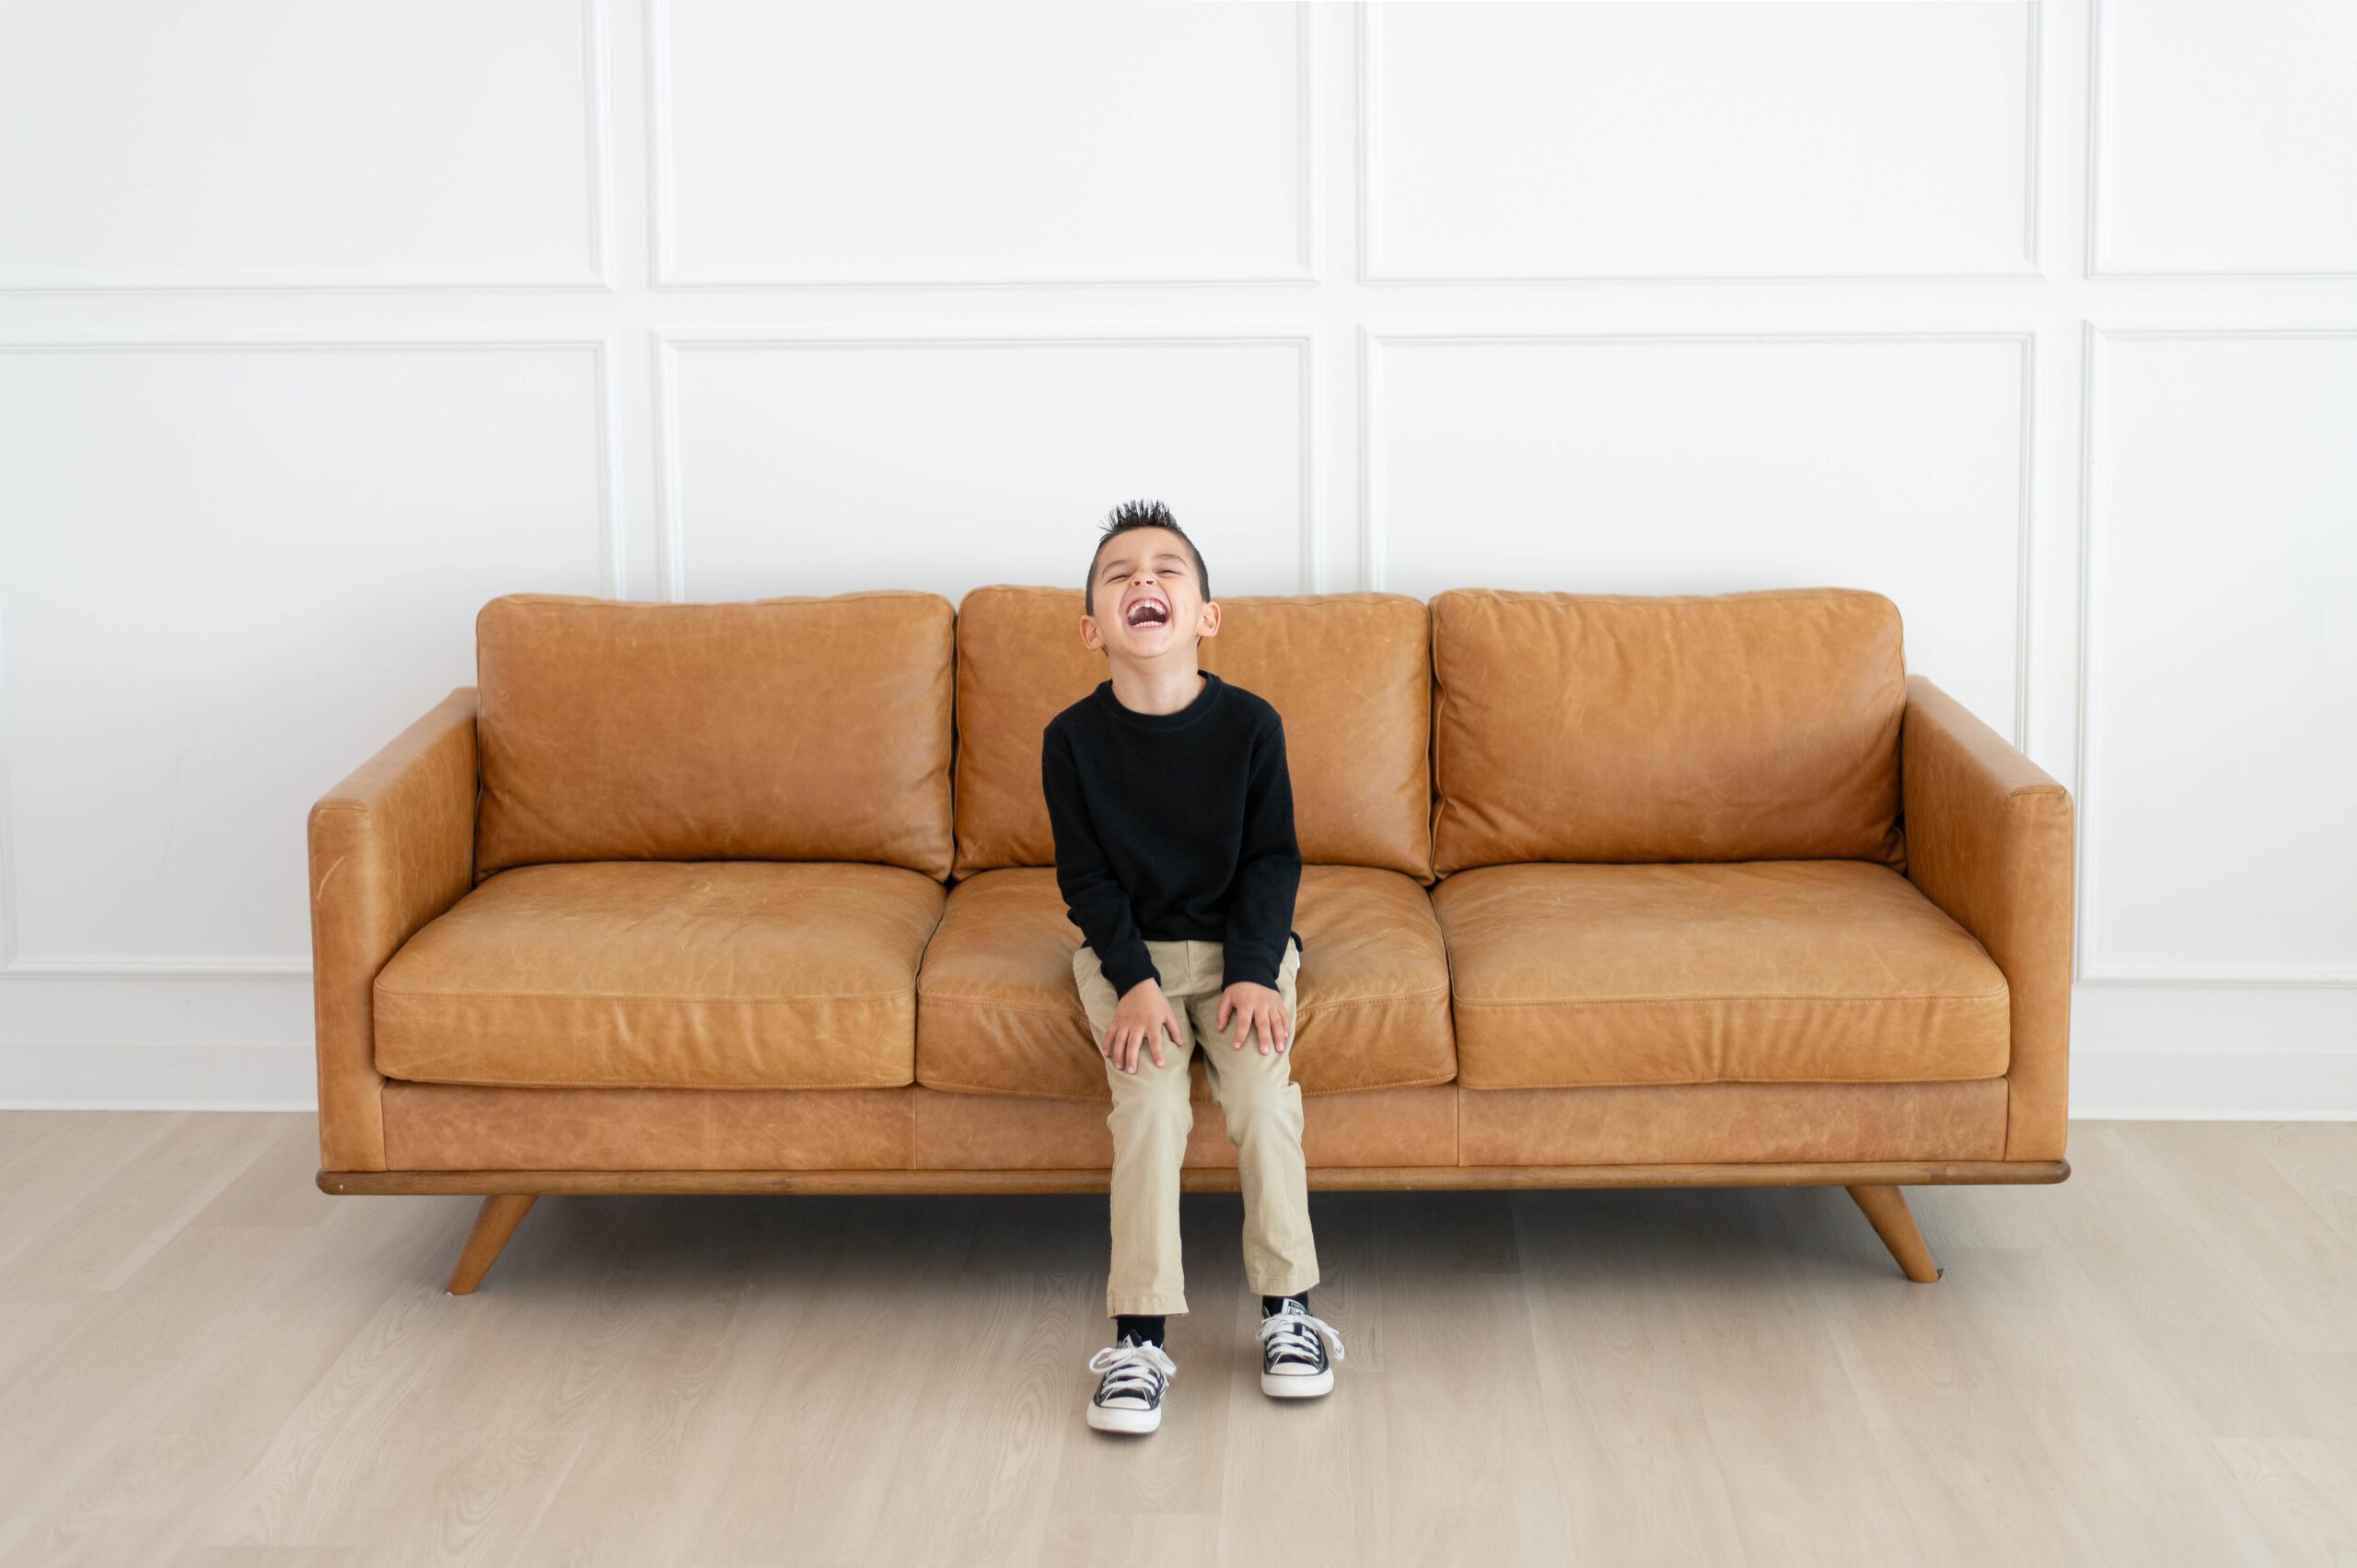 five year old boy sits on a brown leather sofa laughing with his eyes closed and head thrown back